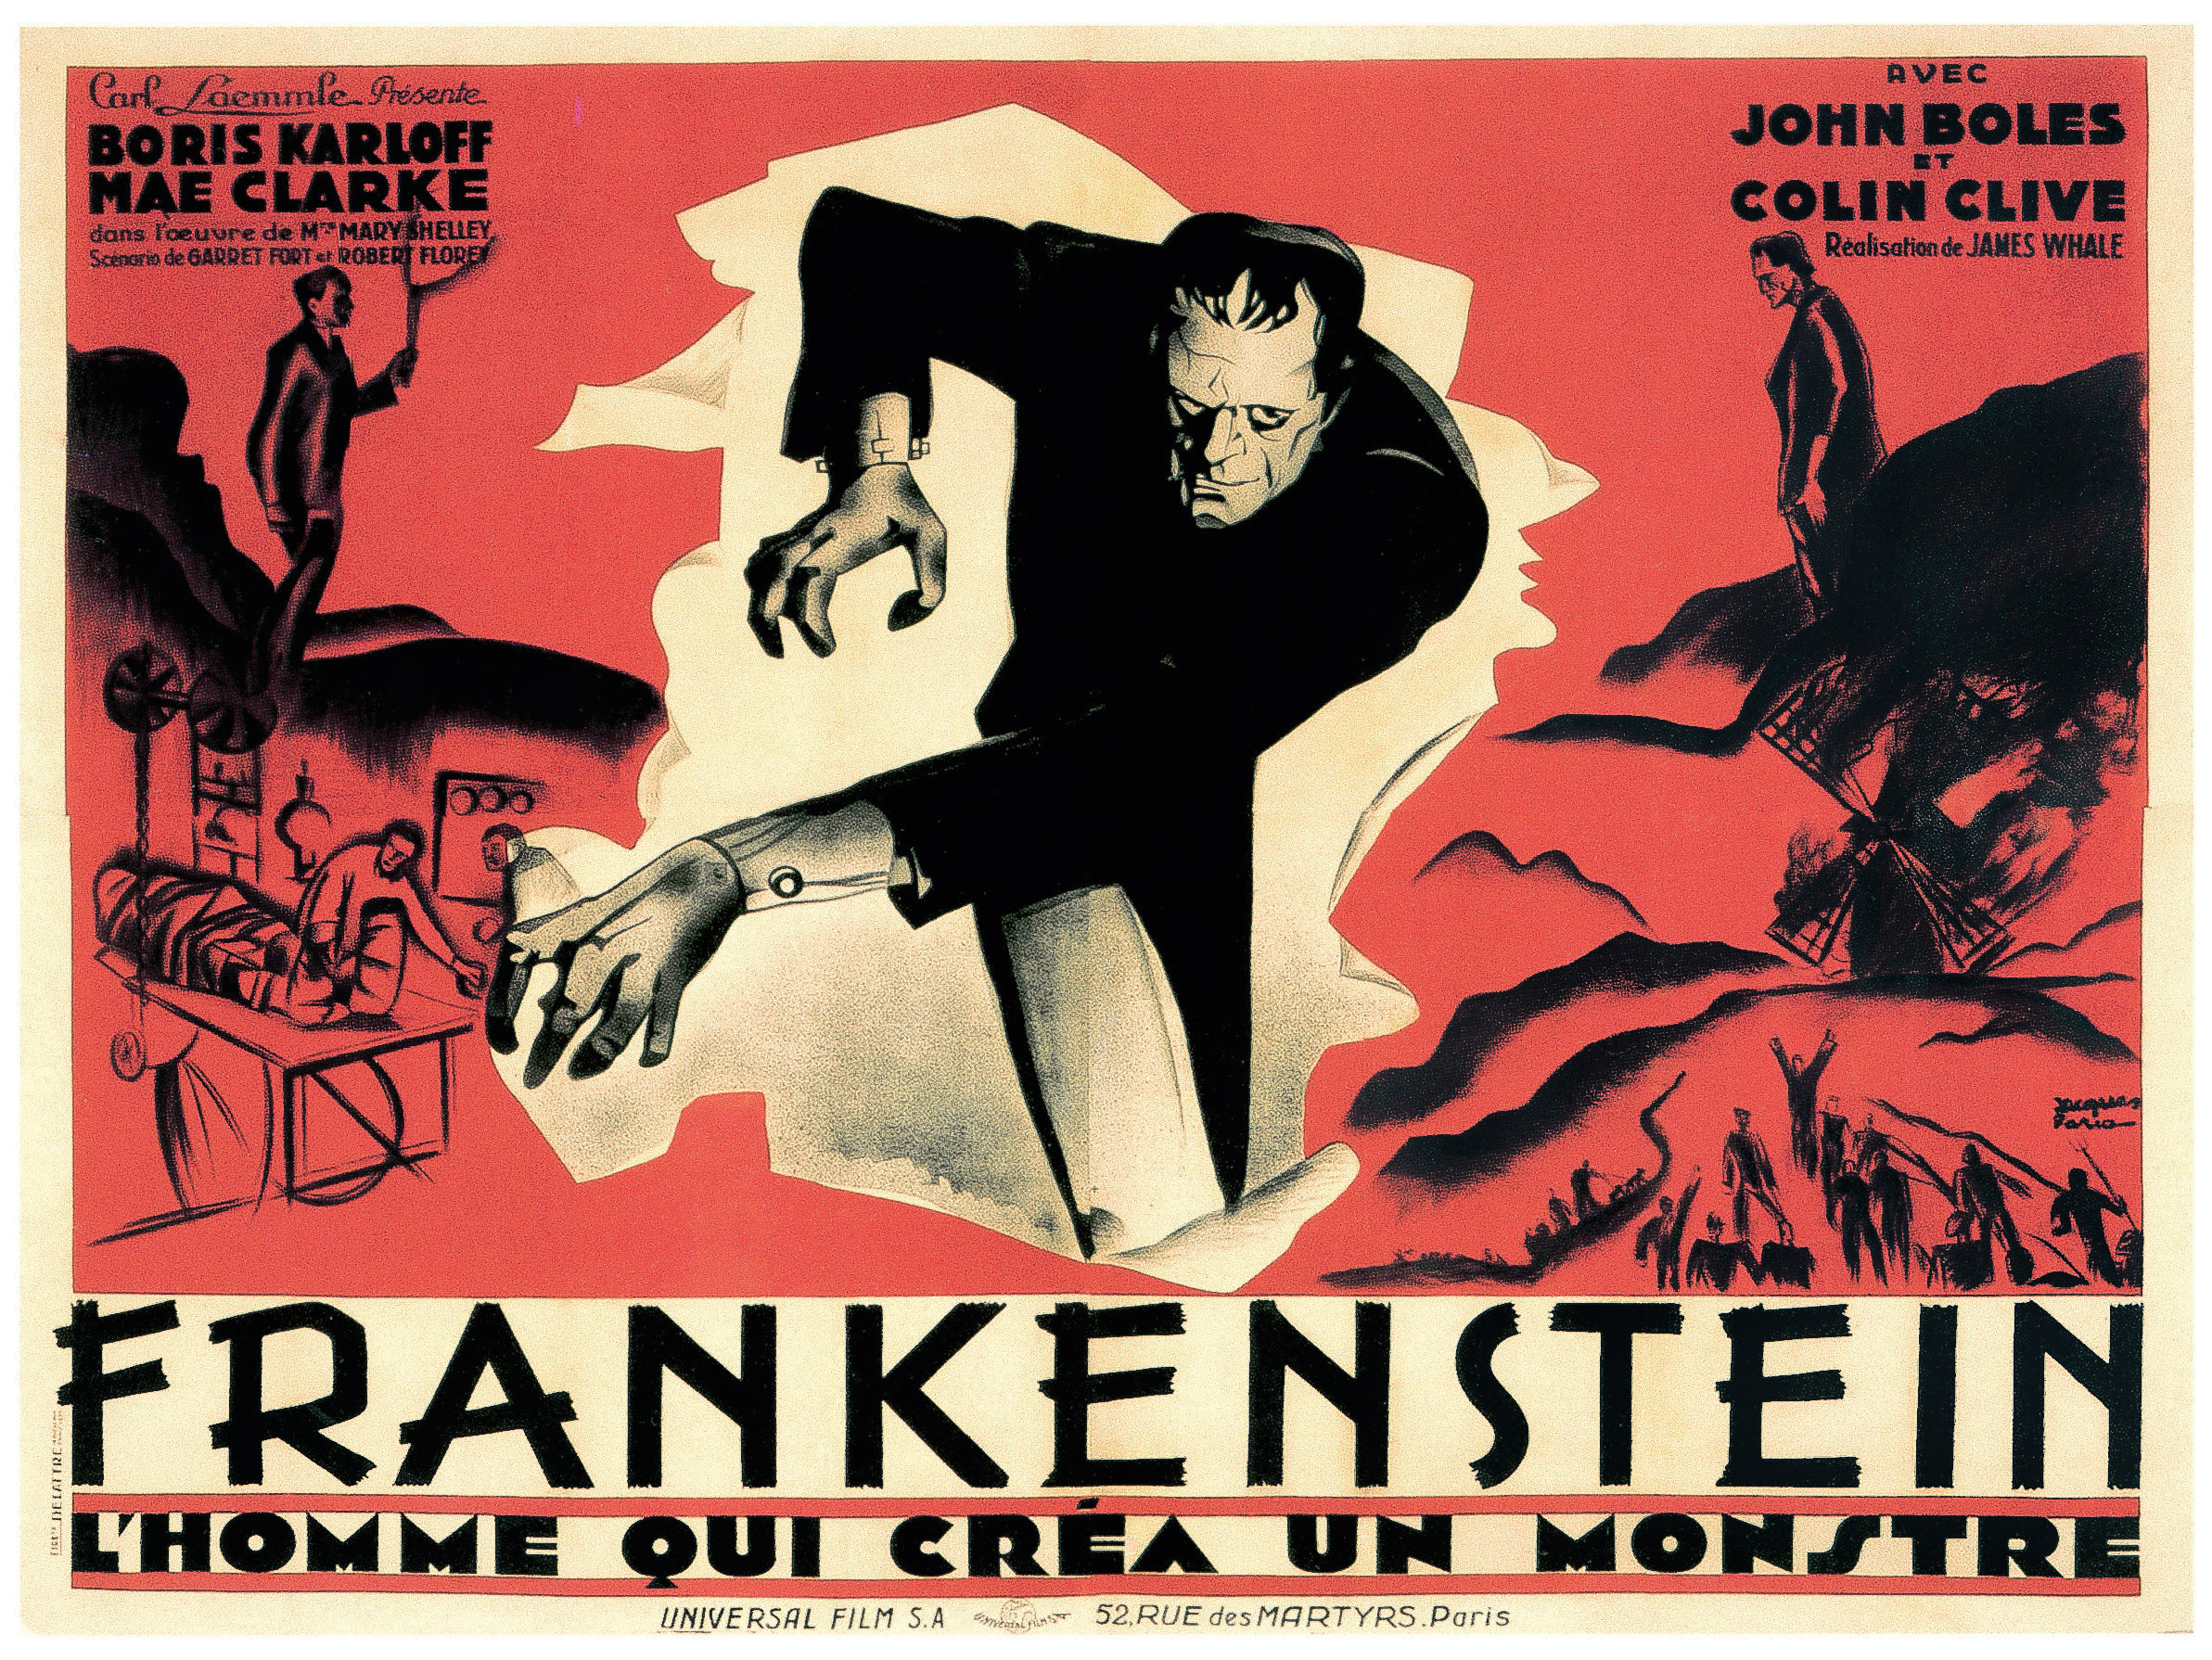 Original French billboard poster for Frankstein by artist Jacques Faria (1931).